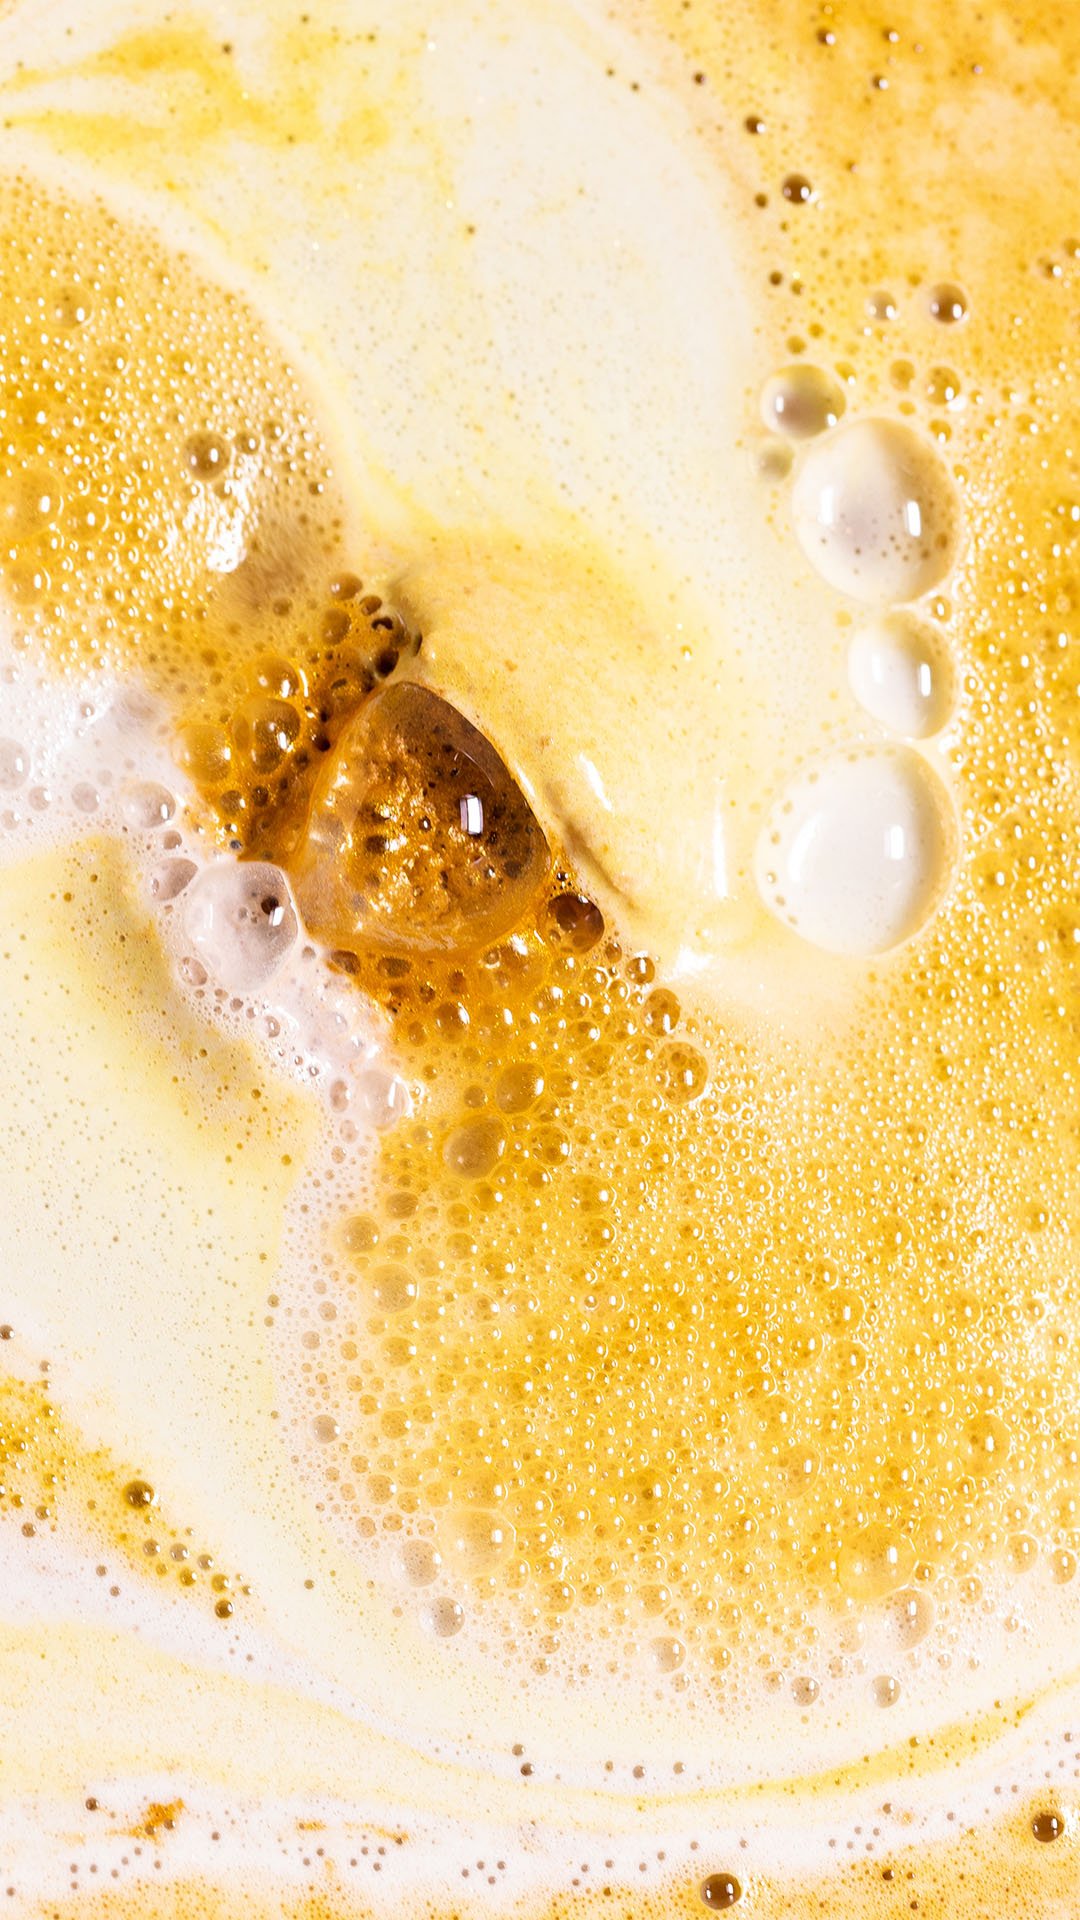 Turmeric Latte bath bomb in the bath, creating thick and creamy golden and white bubbly froth.